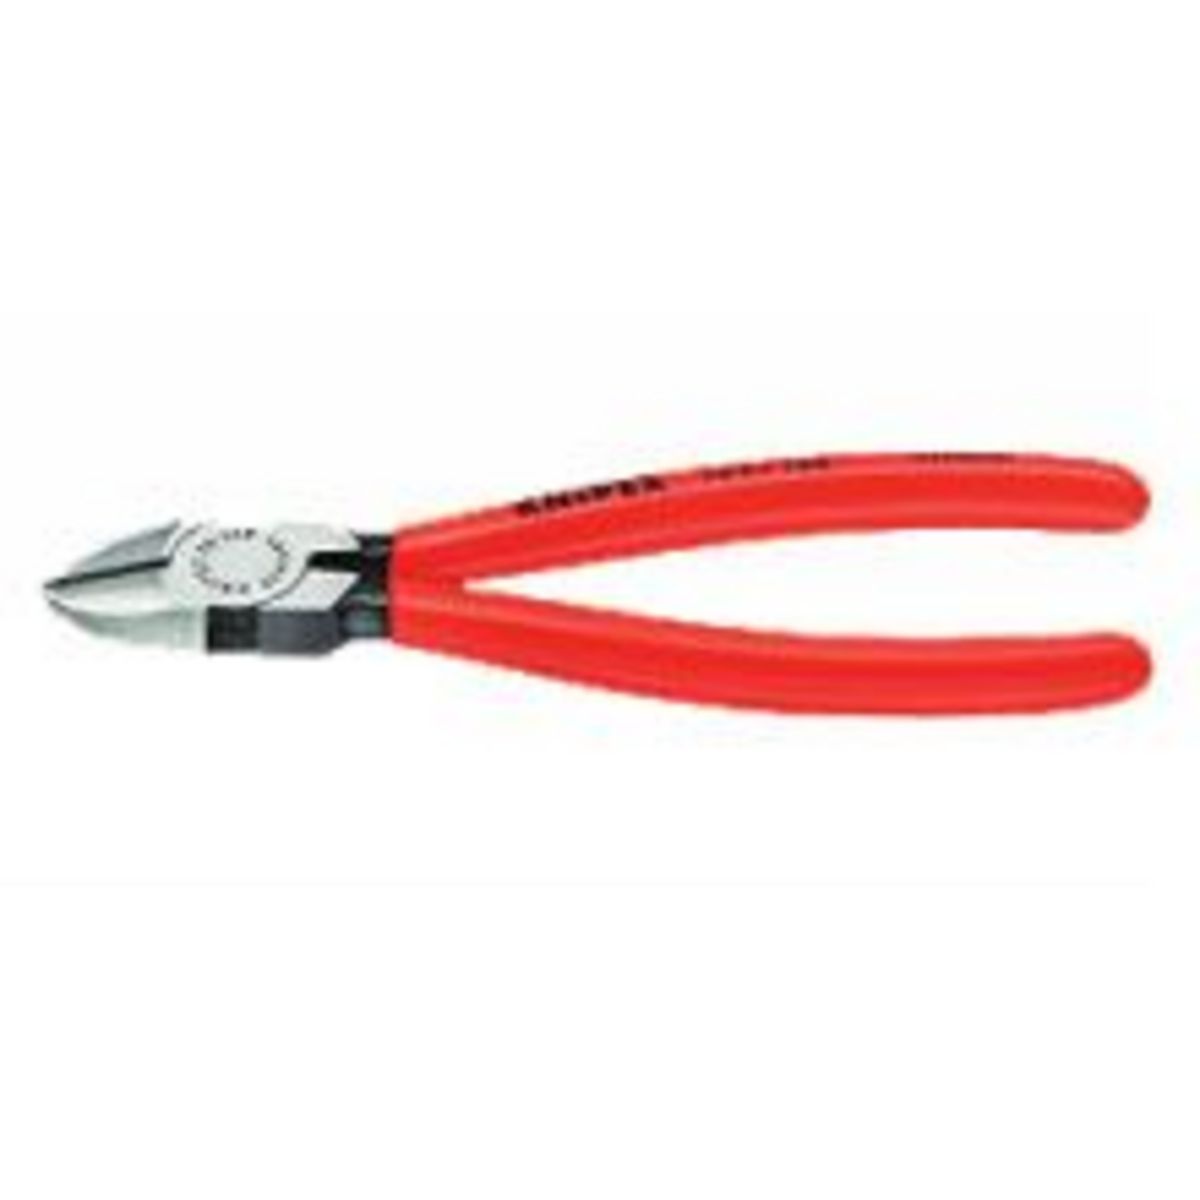 OUTIFRANCE Pince coupante diagonale Knipex